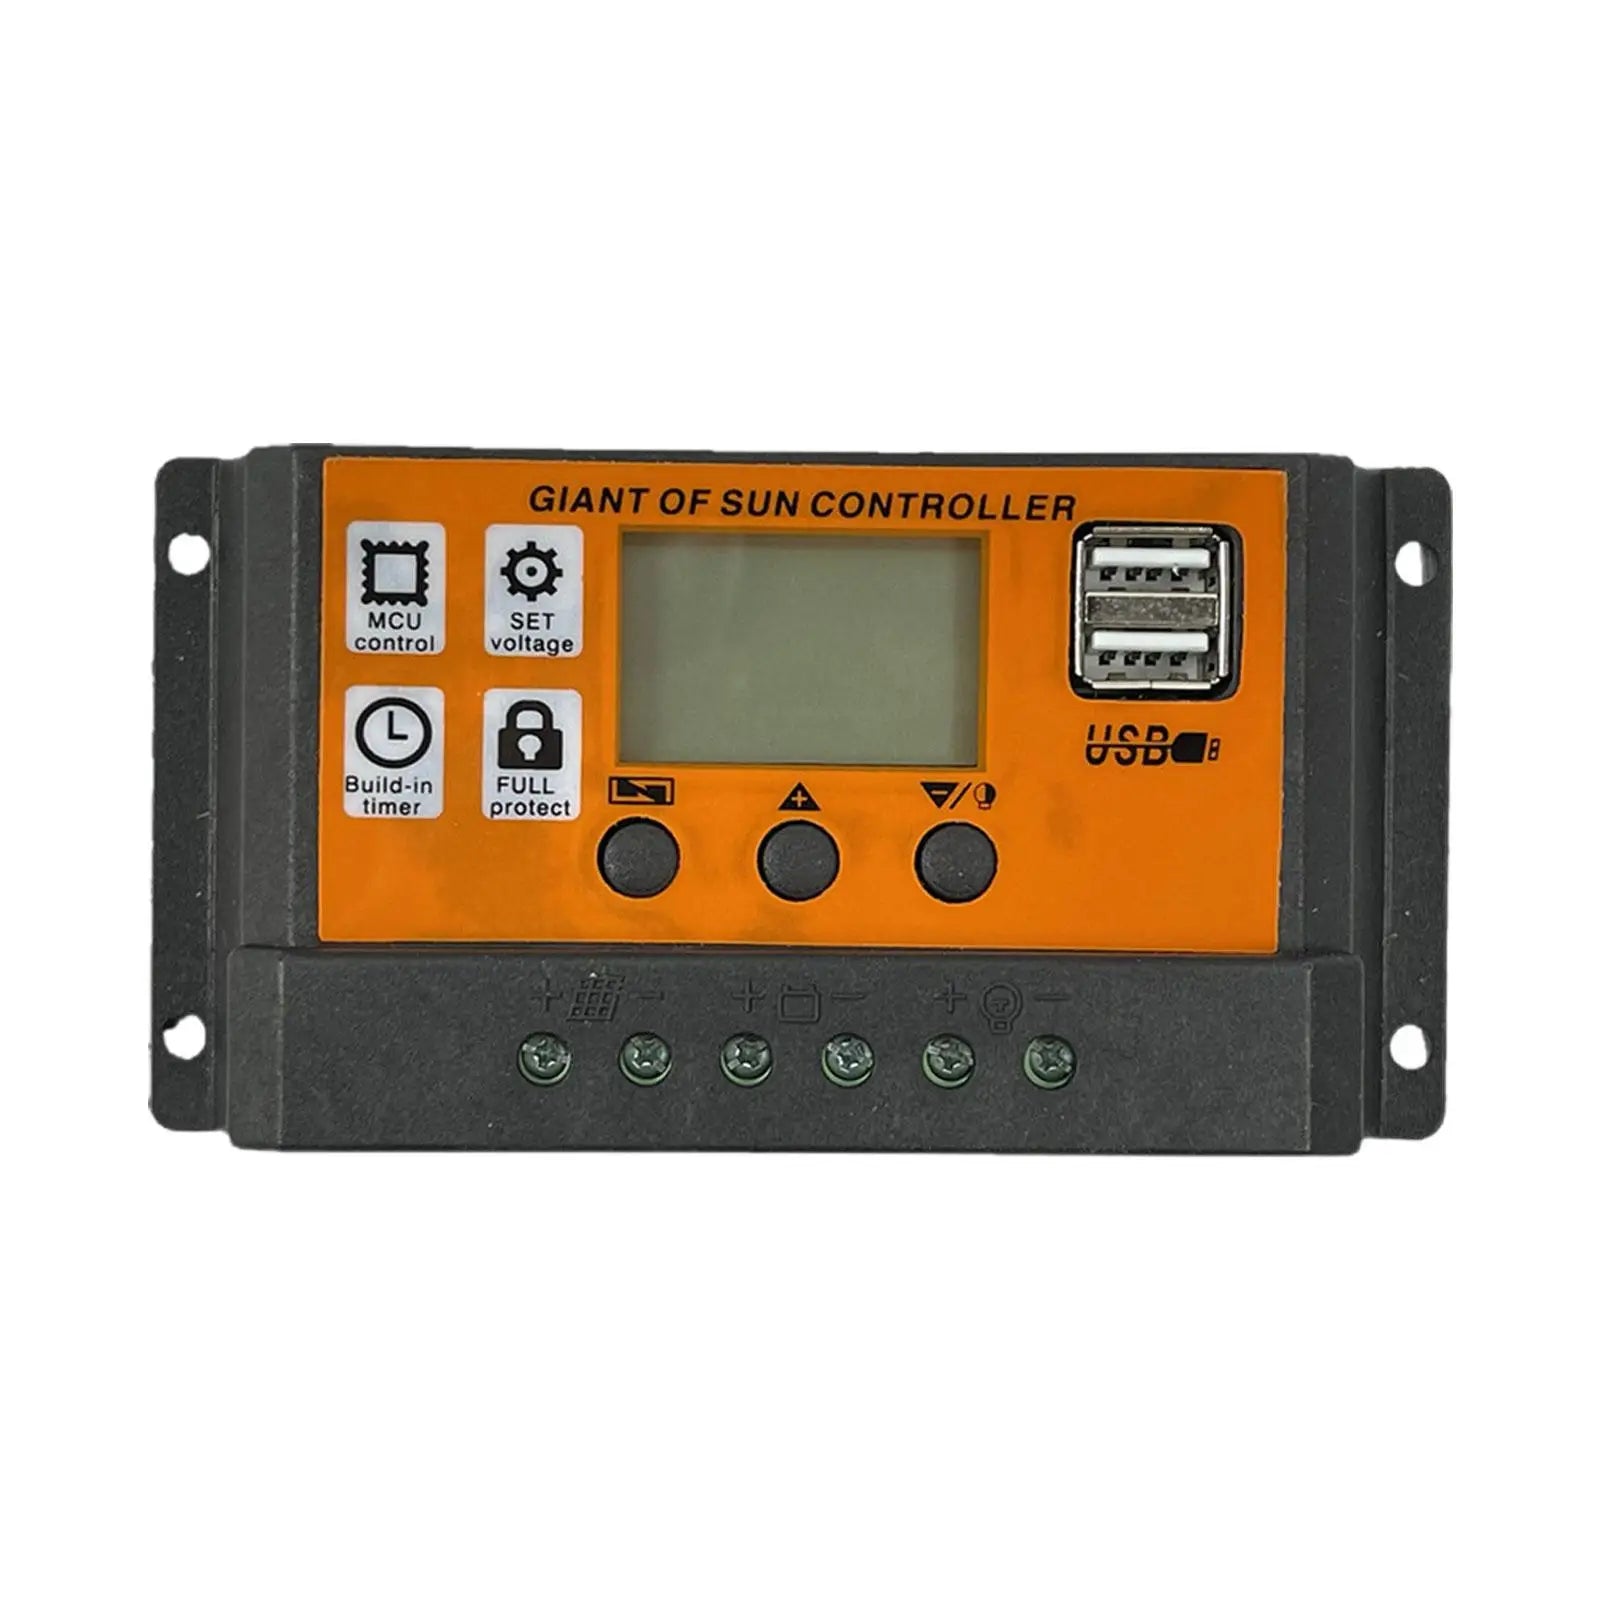 MPPT Solar Charge Controller, Smart solar power controller with auto-focus, timer, and battery protection features.